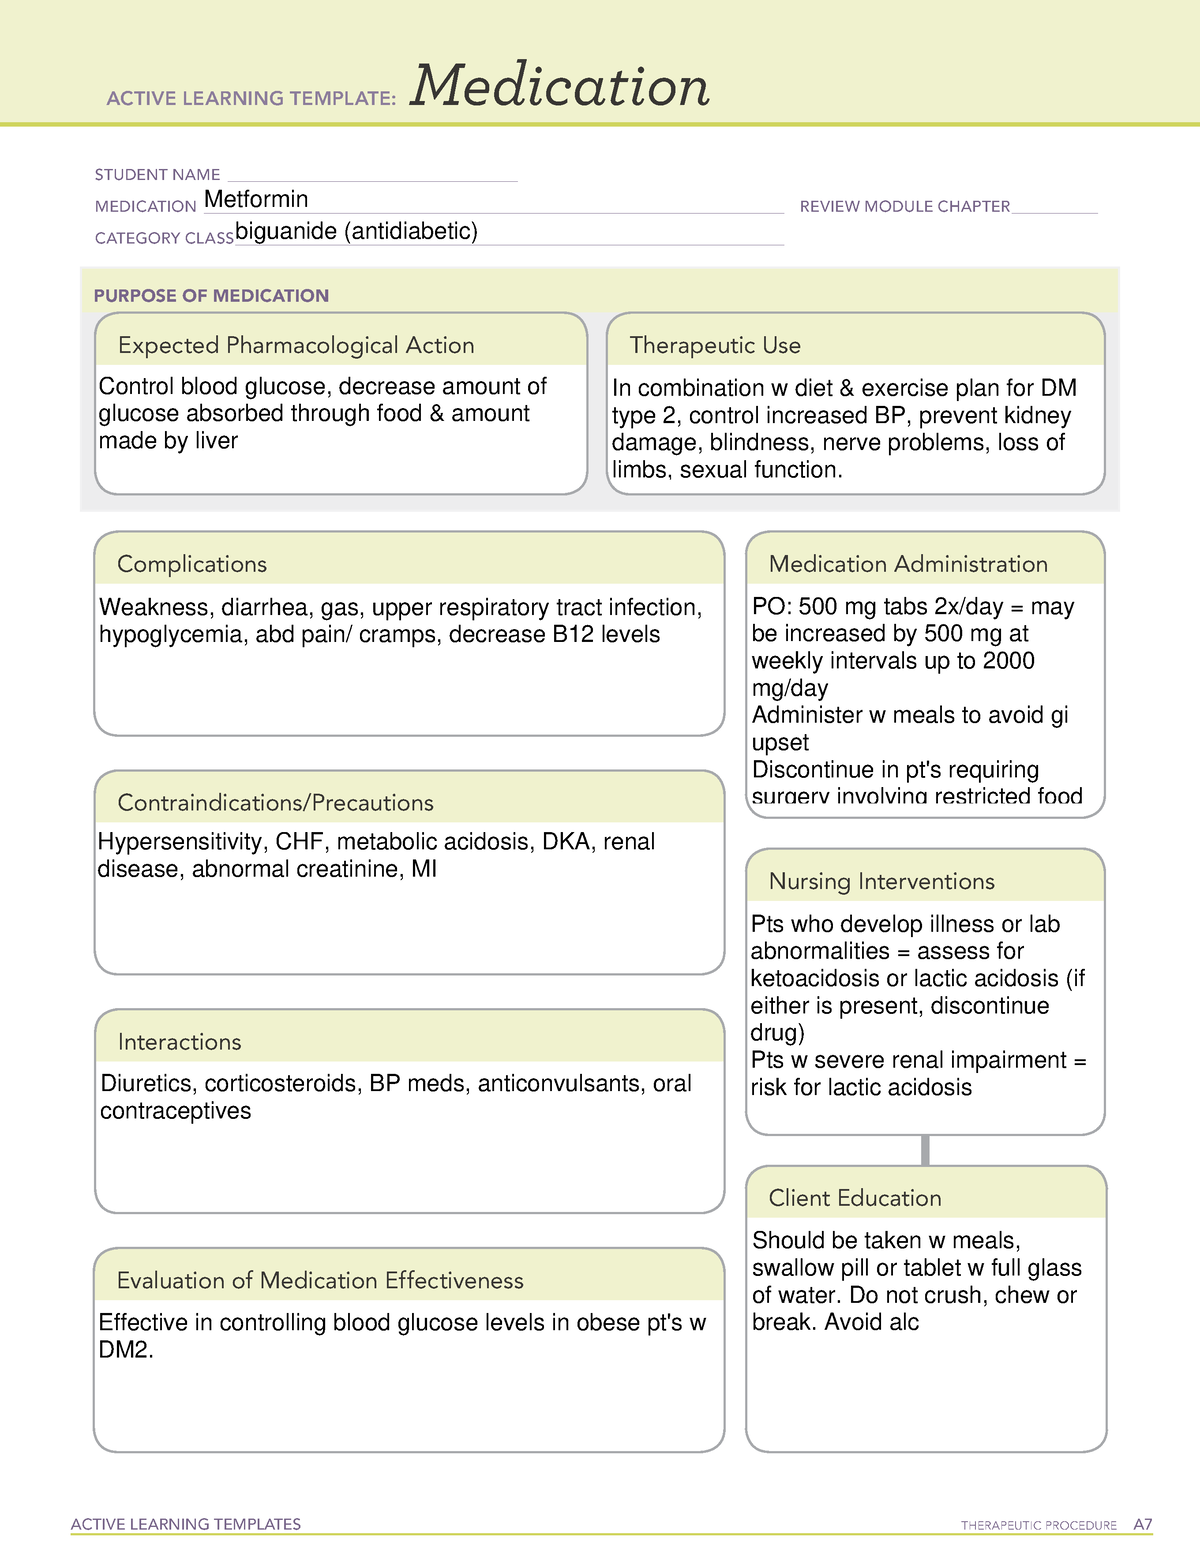 metformin-active-learning-templates-therapeutic-procedure-a